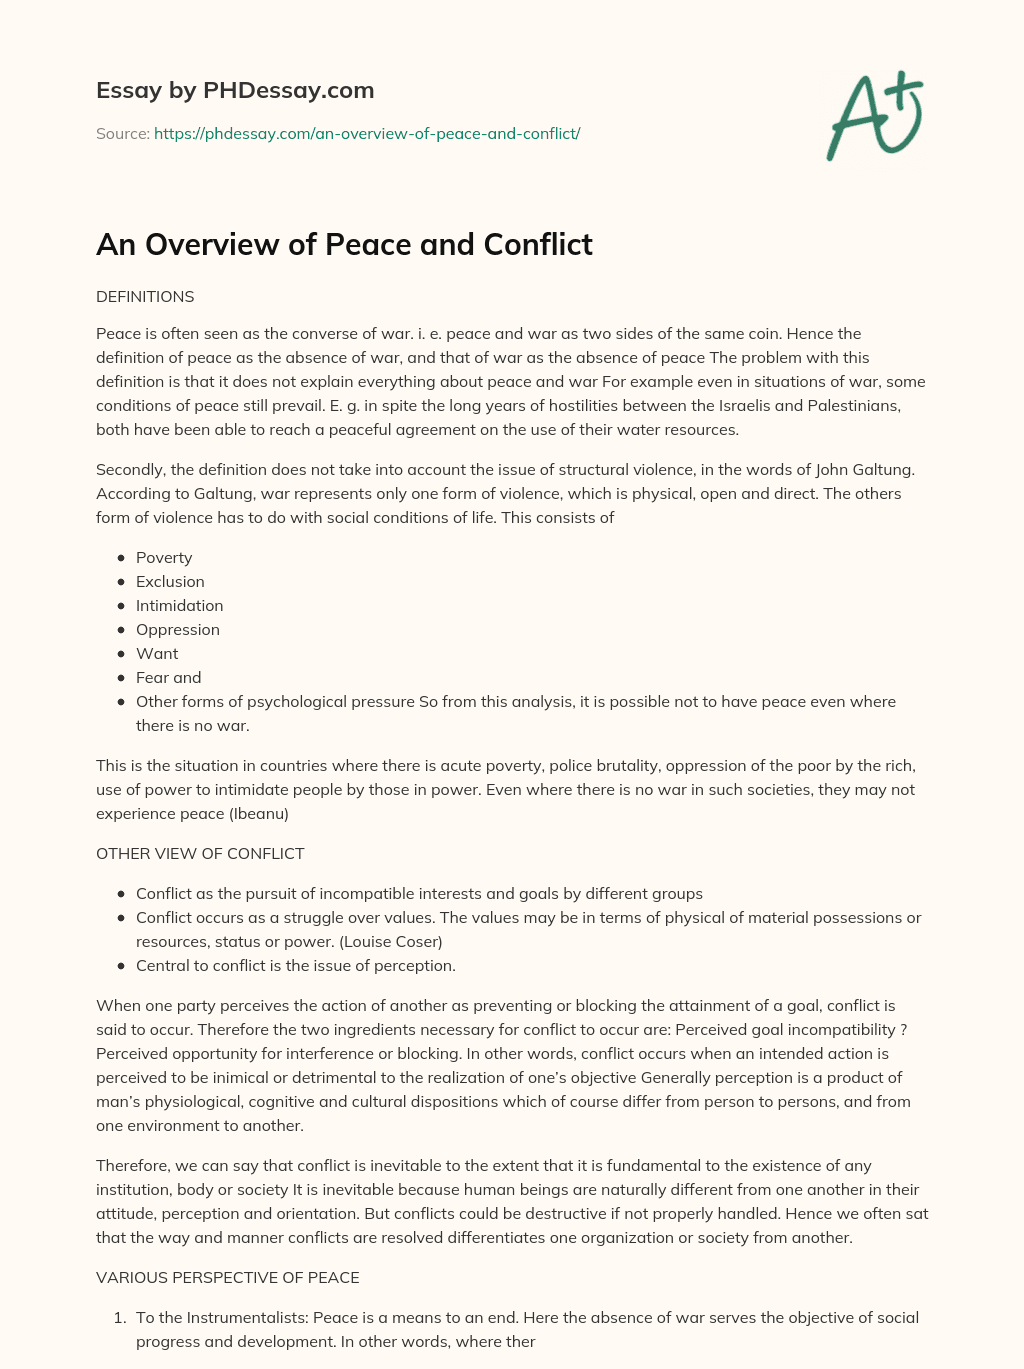 peace and conflict essay